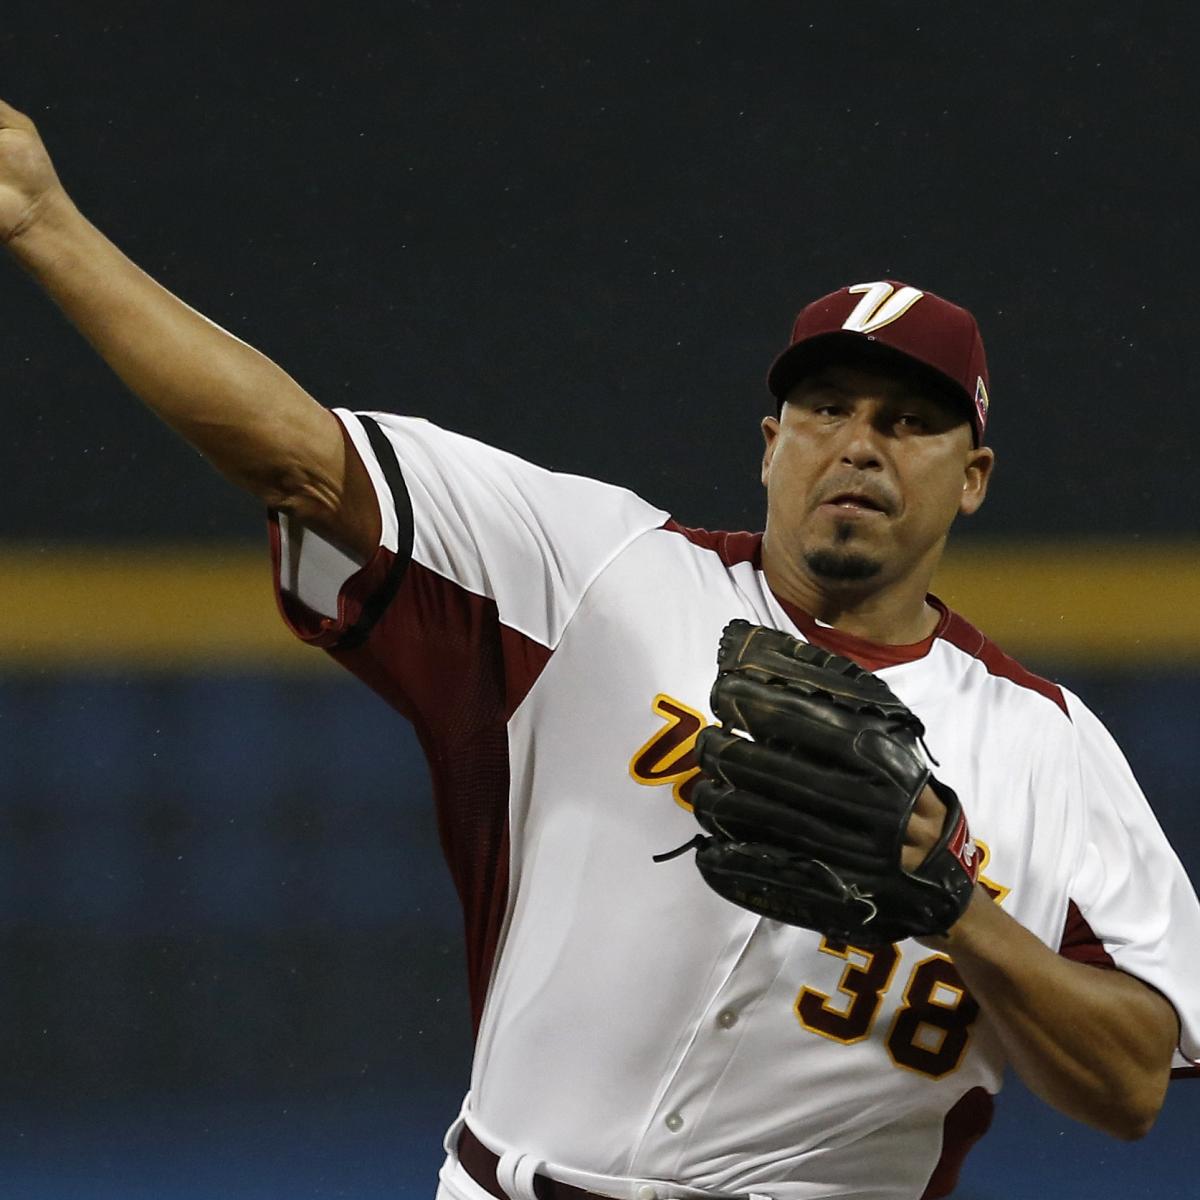 Report: Carlos Zambrano is Pitching in the World Baseball Classic